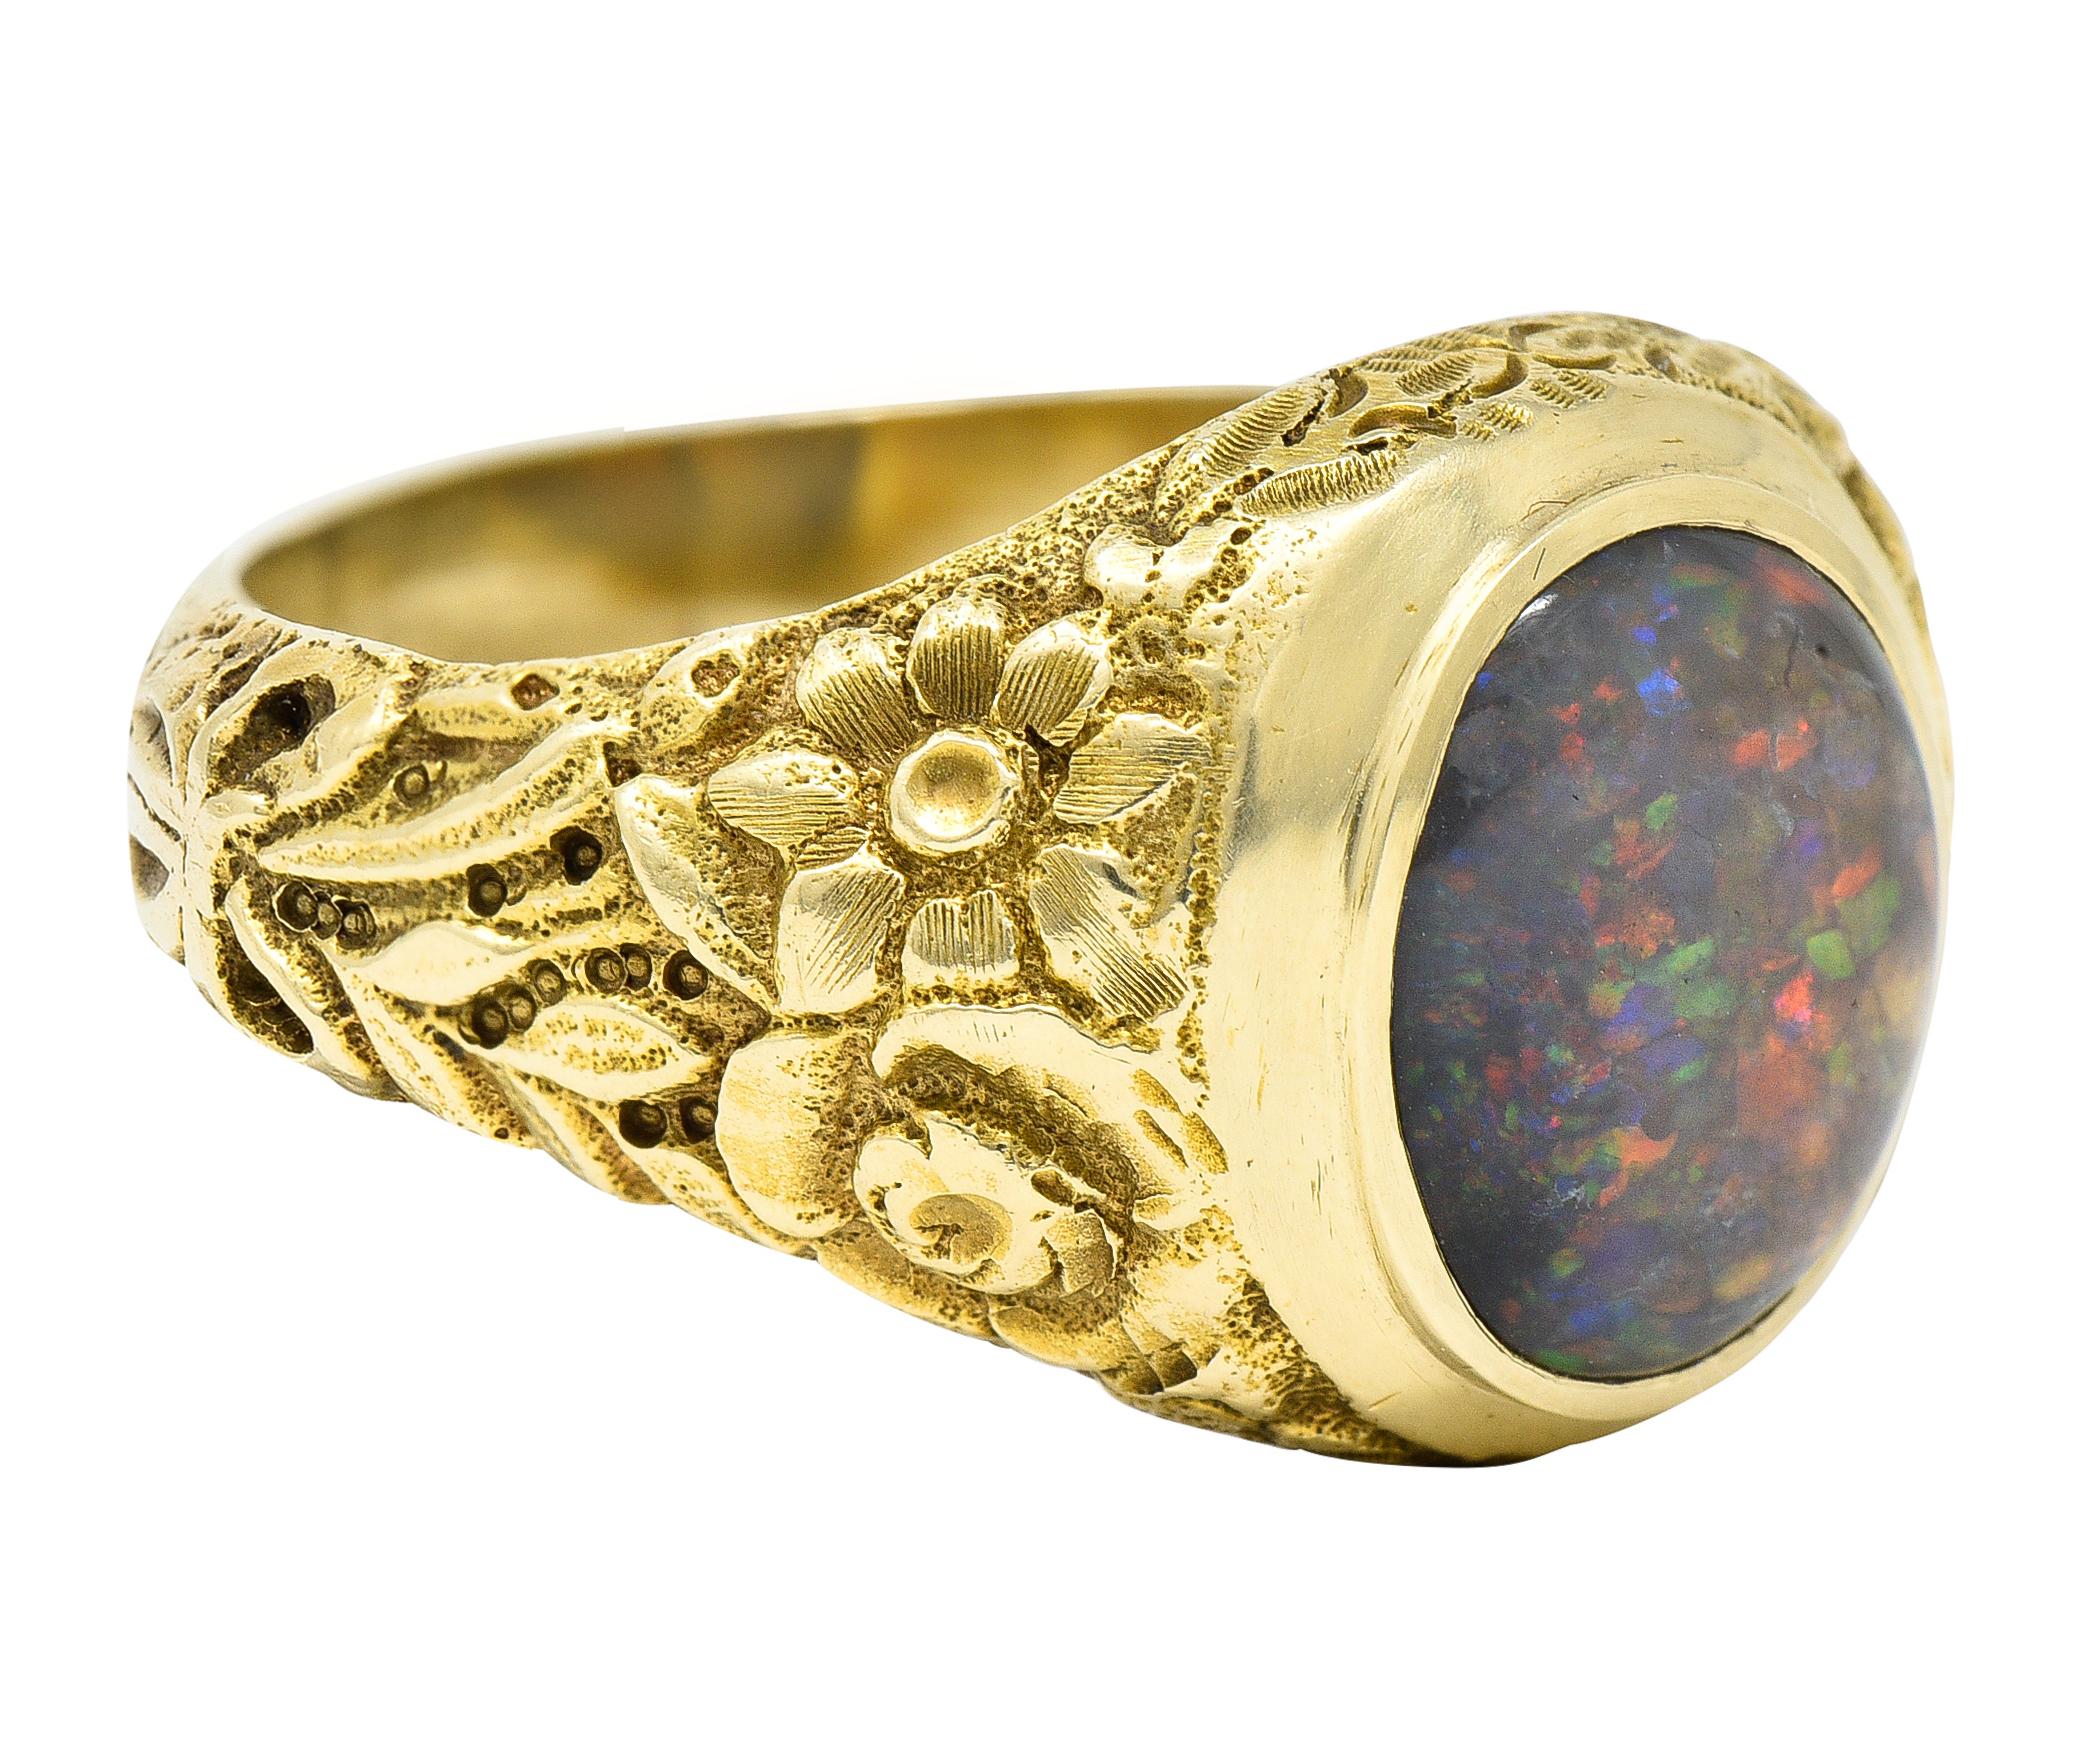 Signet style band ring centers an oval black opal cabochon measuring approximately 12.0 x 10.0 mm

Translucent gray in body color with strong and spectral play-of-color

Bezel set in a polished gold surround with a highly rendered shank

Depicting